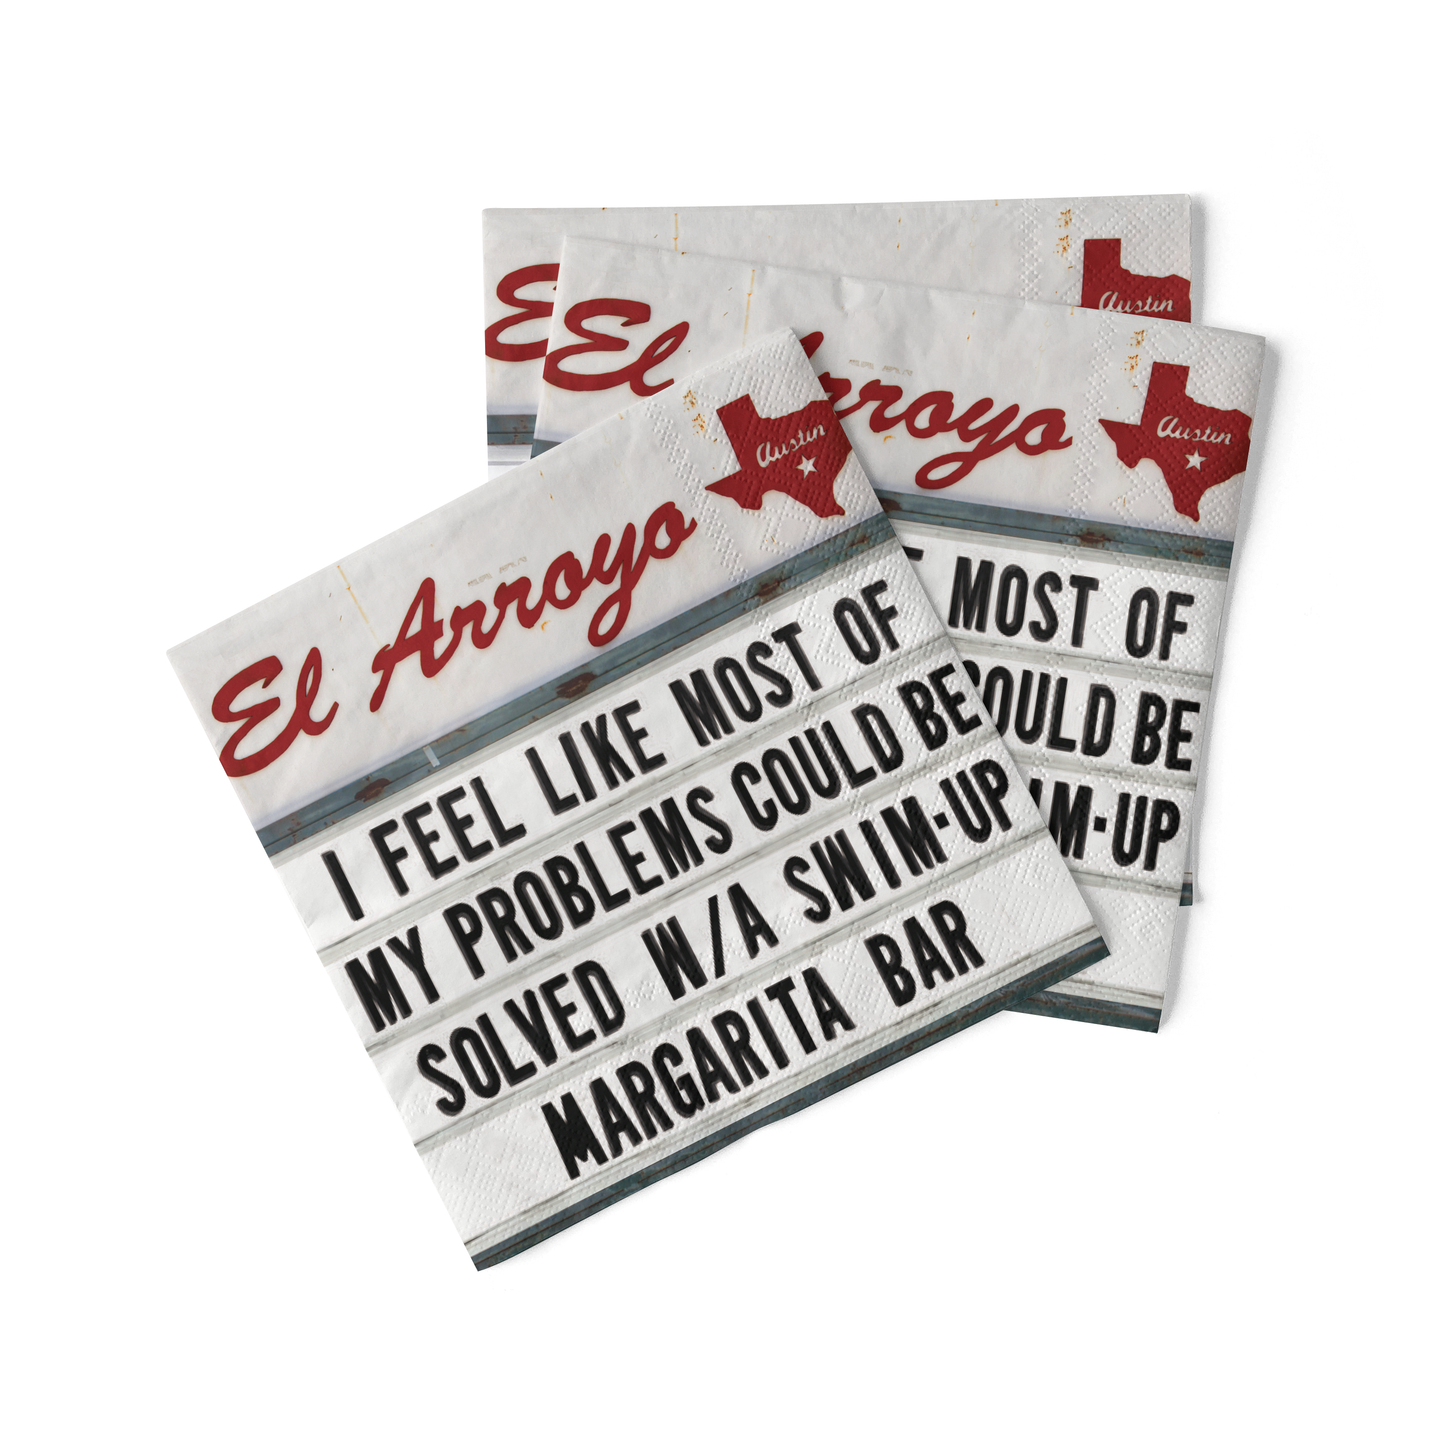 El Arroyo - Cocktail Napkins (Pack of 20) - My Problems